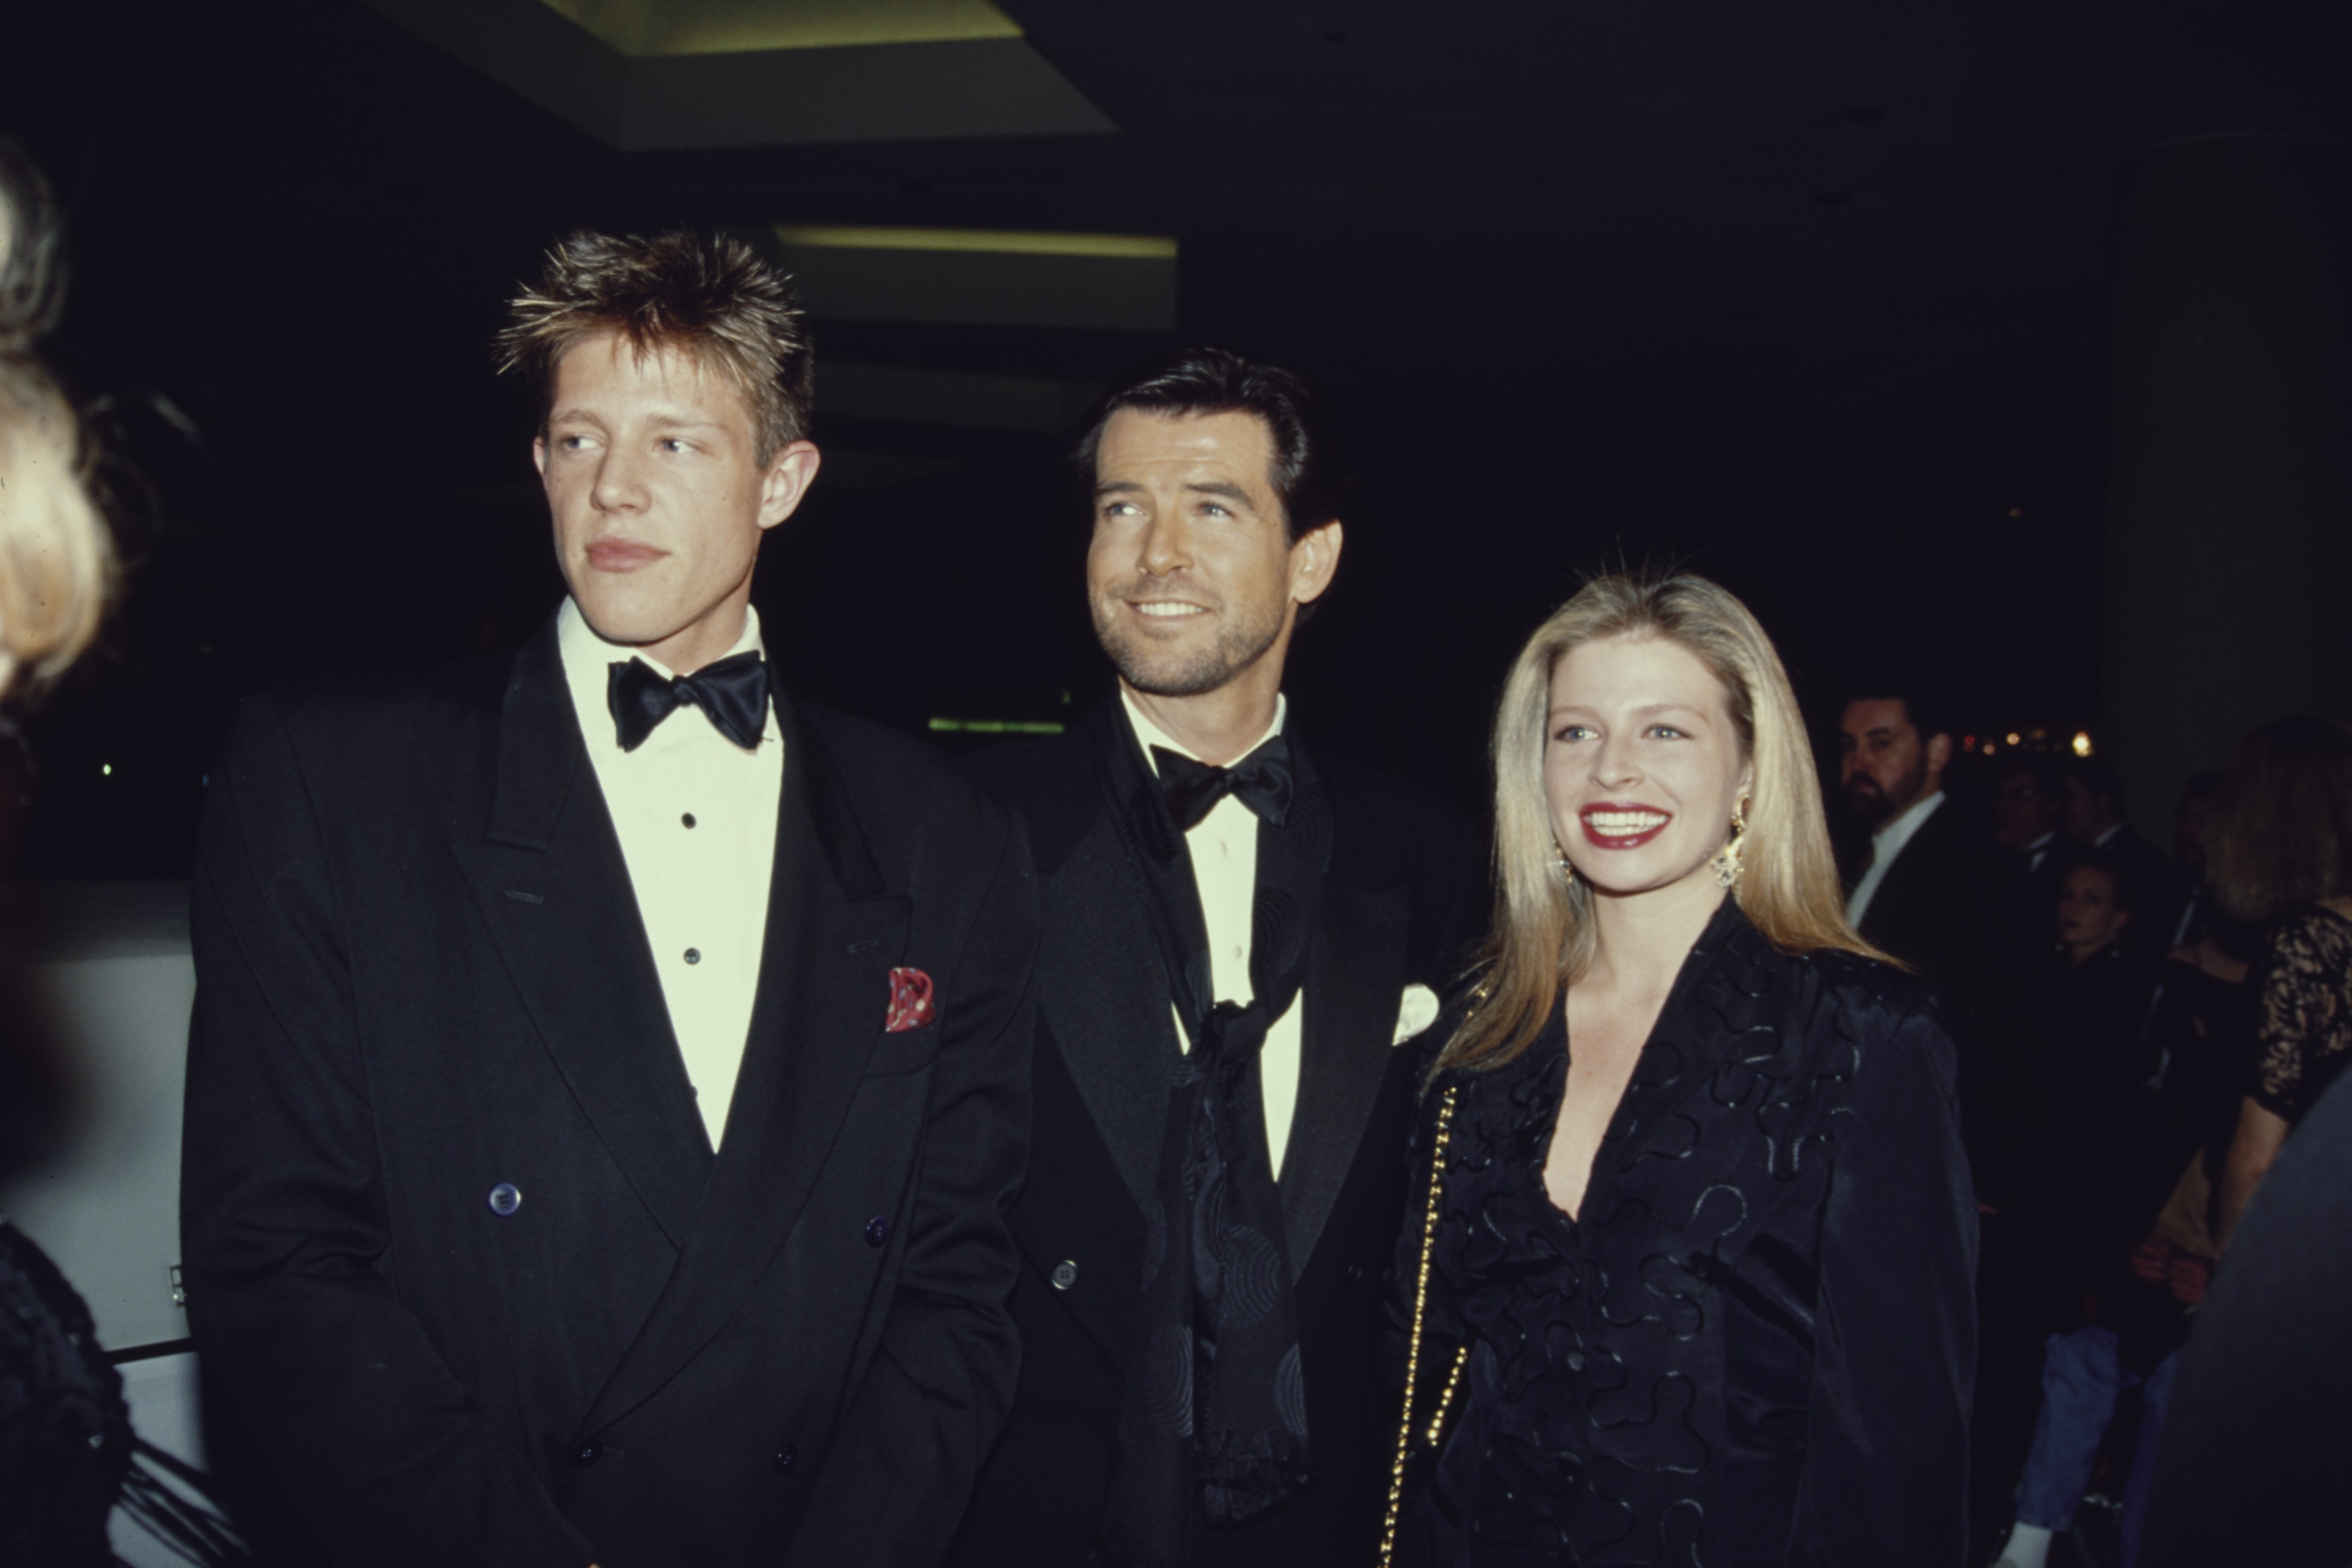 Irish actor Pierce Brosnan with his adopted children Christopher Harris and Charlotte Harris, at the Beverly Hilton Hotel in Beverly Hills, California, 18th January 1992. | Source: Getty Images